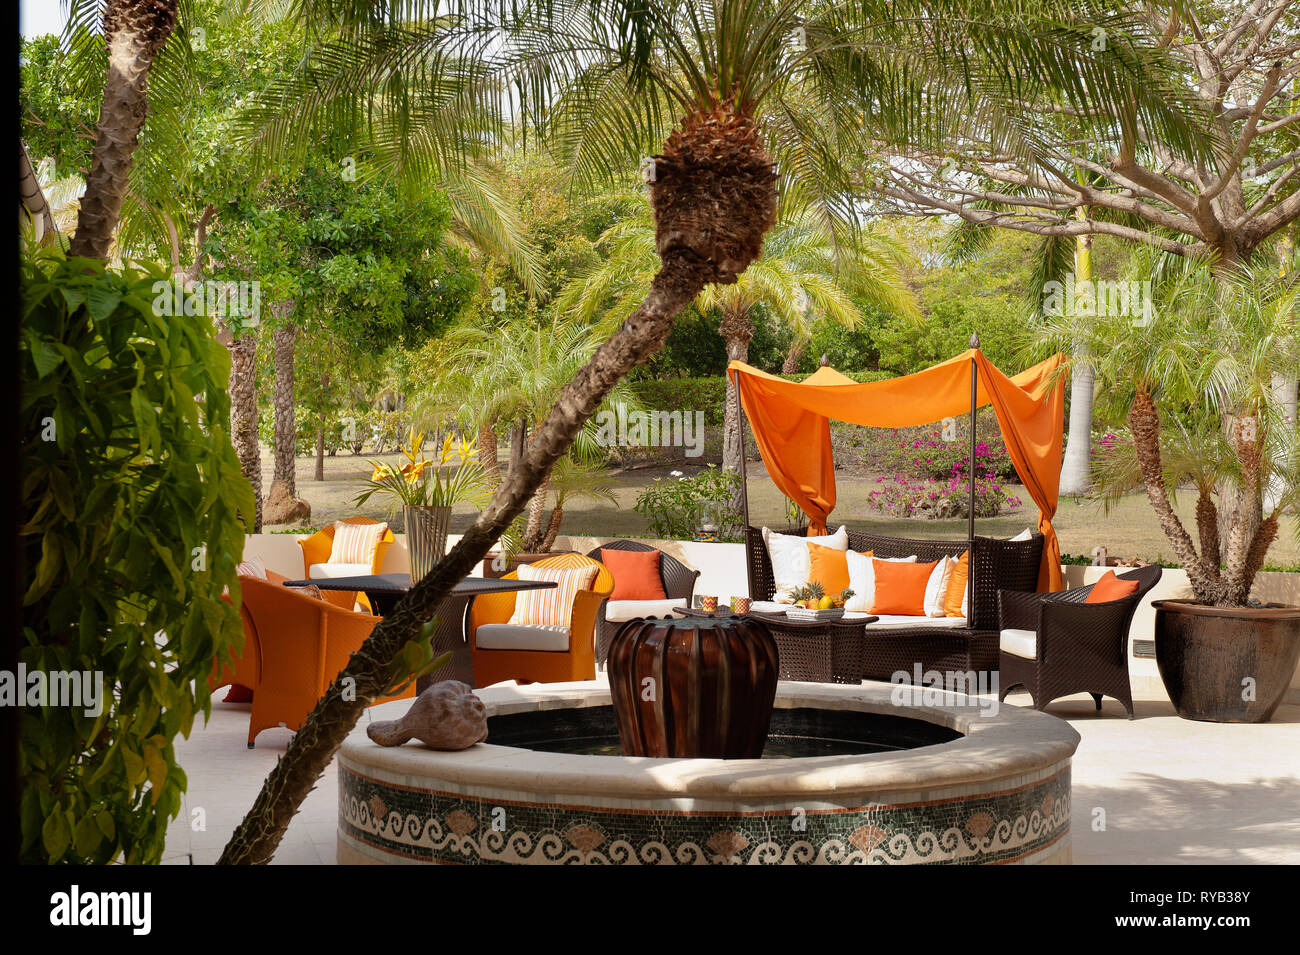 'Fountain by furniture on patio at Tamarind Cove, Antigua' Stock Photo